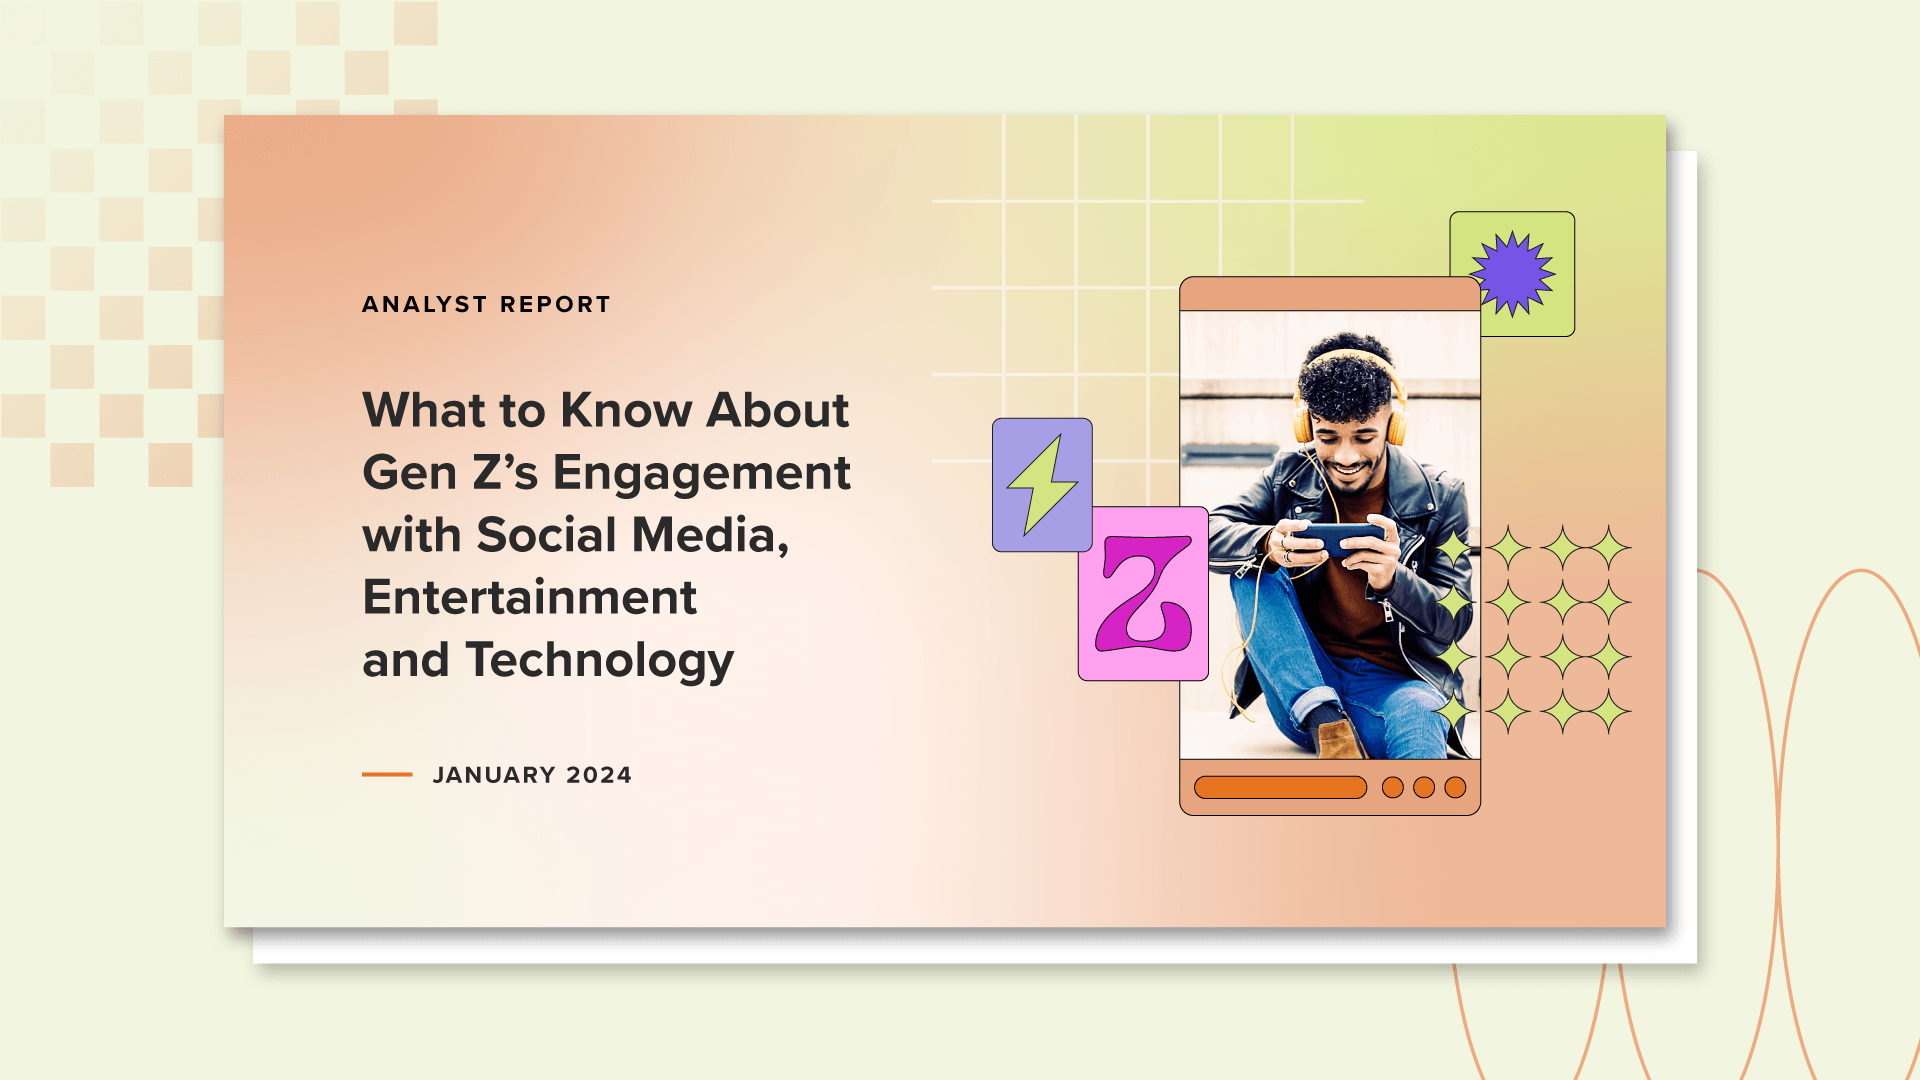 Download the Report: What to Know About Gen Z’s Engagement with Social Media, Entertainment and Technology